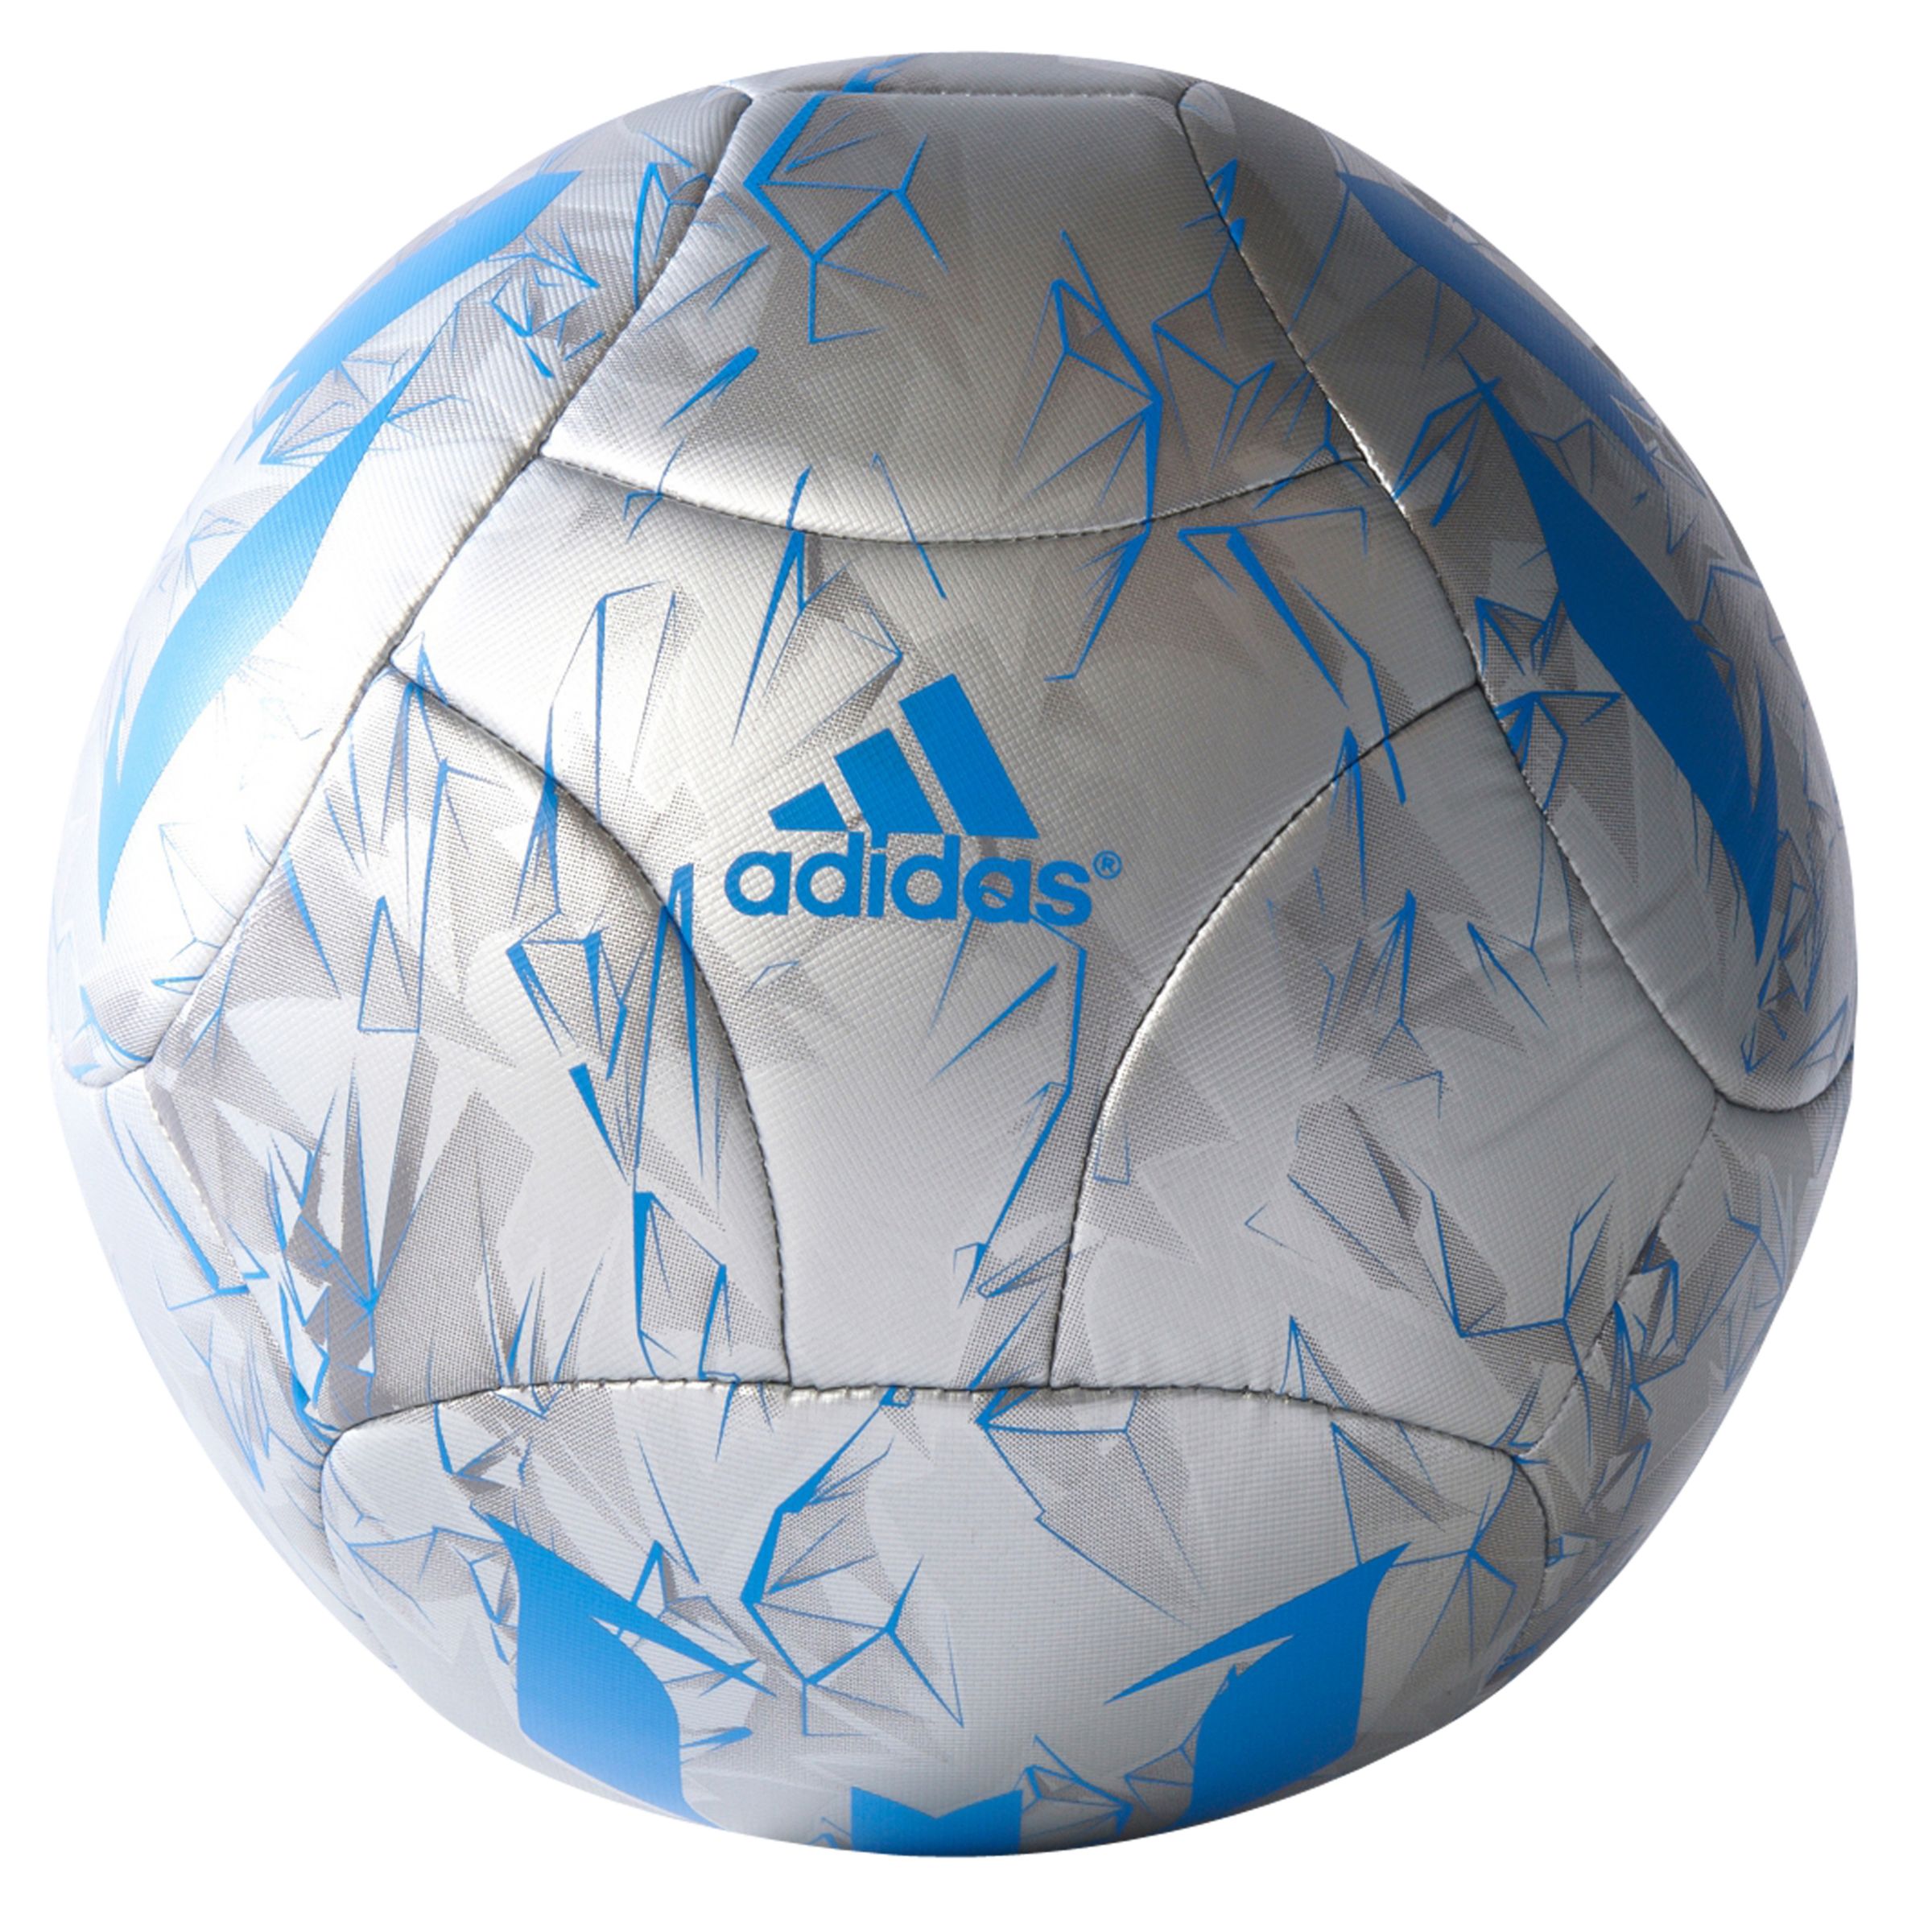 adidas messi q3 ball review